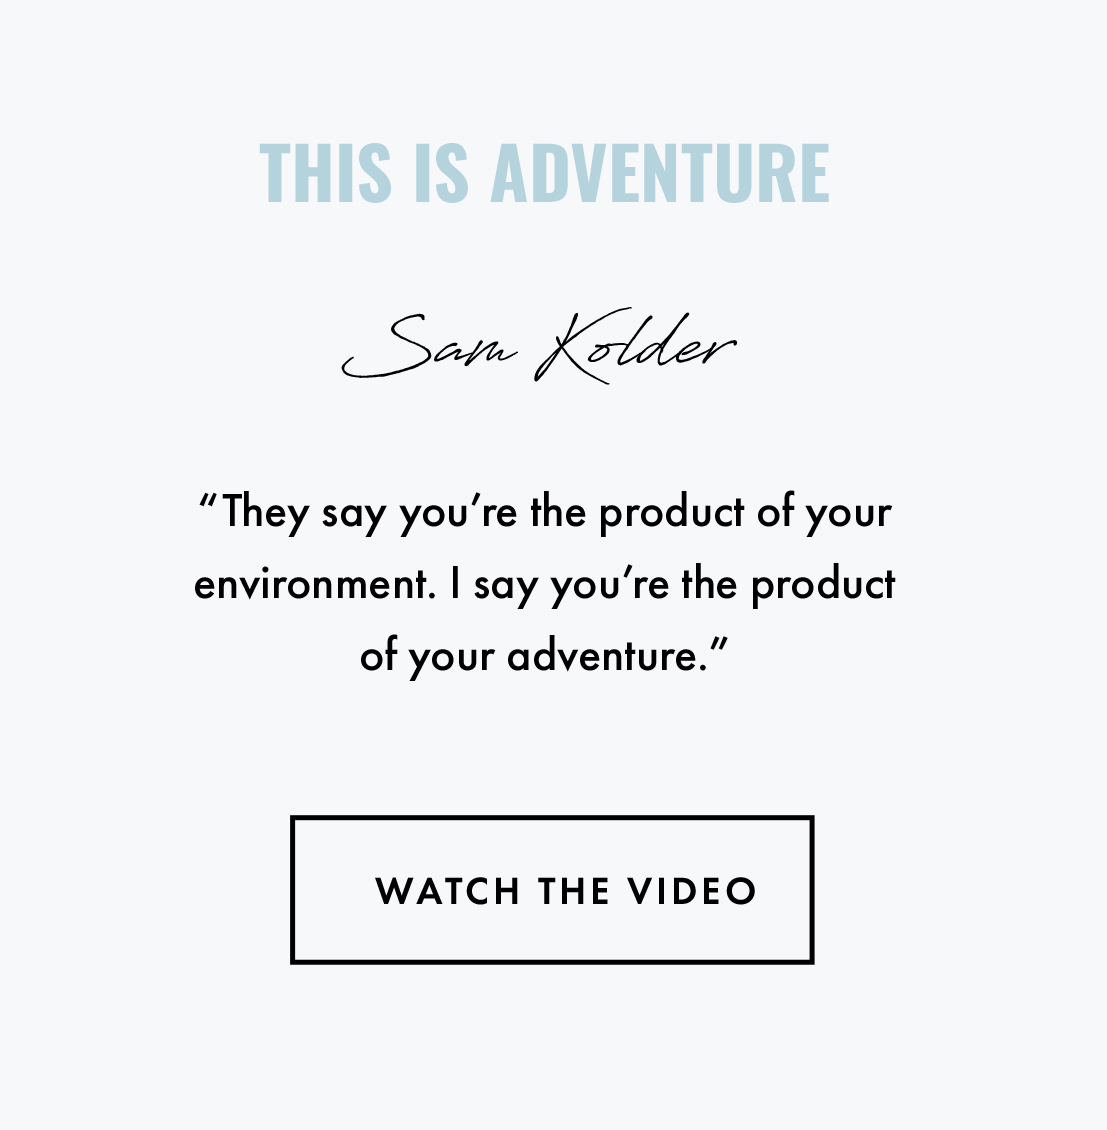 This is Adventure Sam Kolder. "They say you're the product of your environment. I say you're the product of your adventure." Watch the video